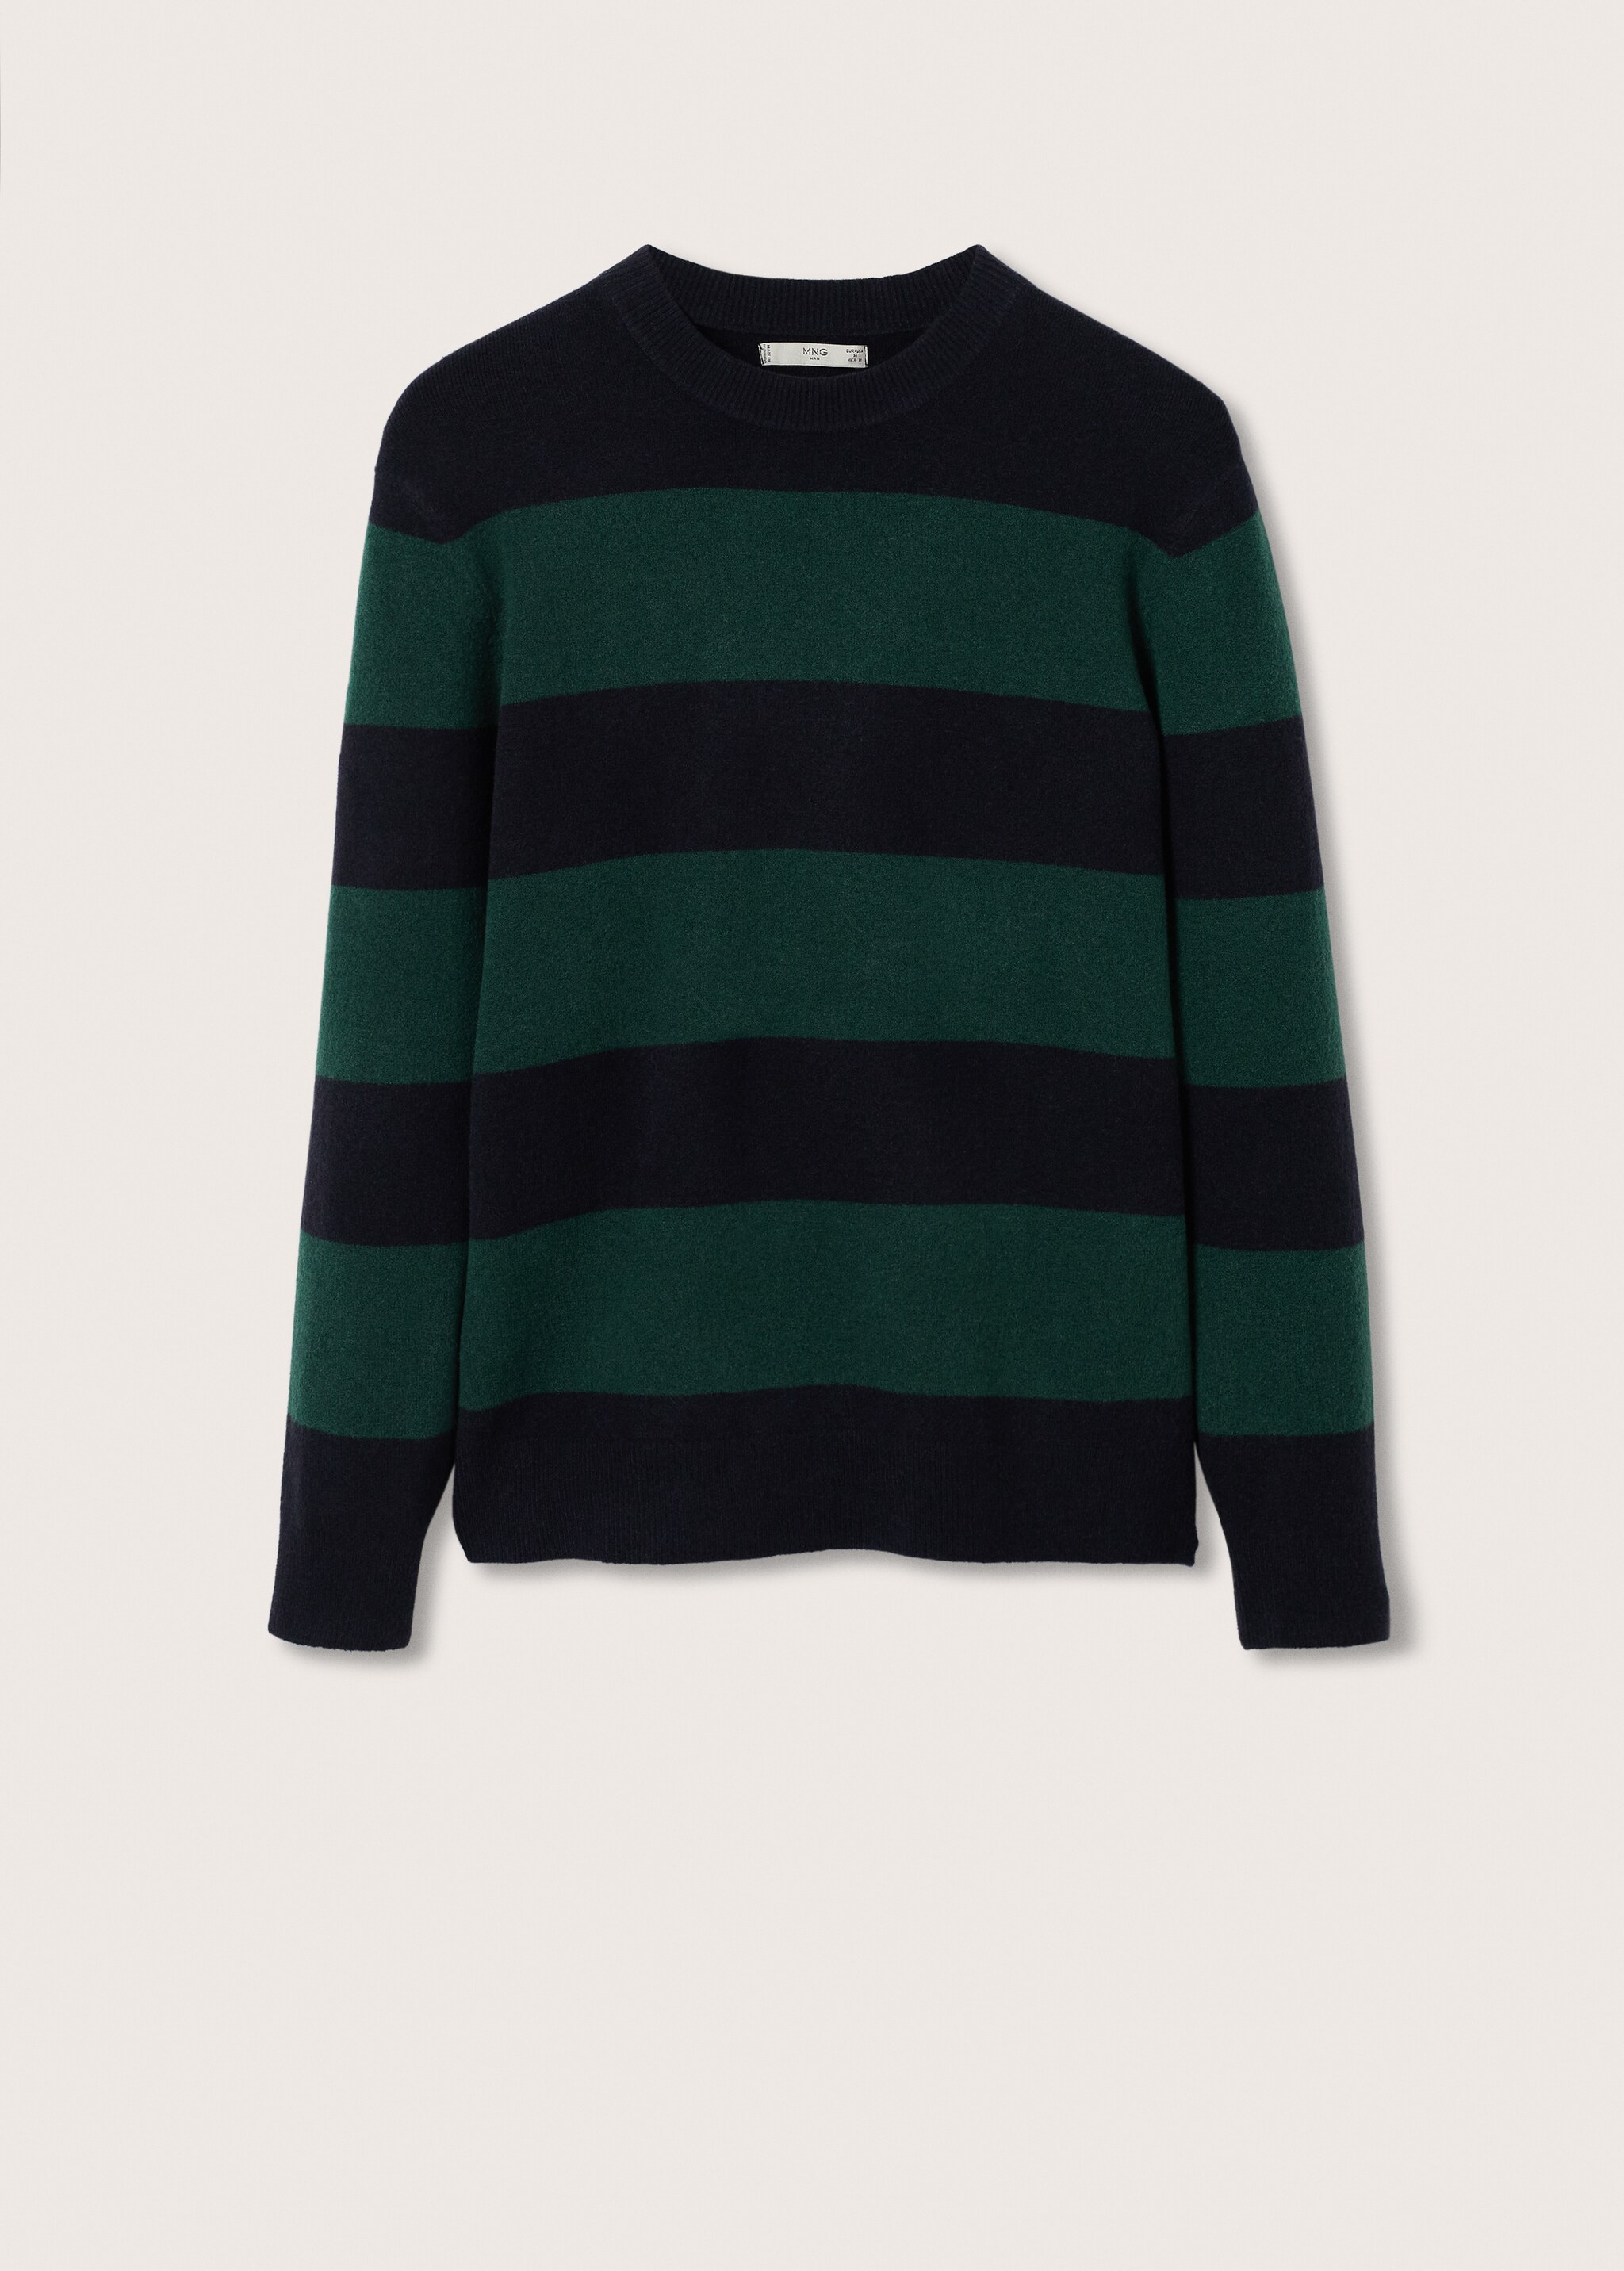 Stripe textured sweater - Article without model